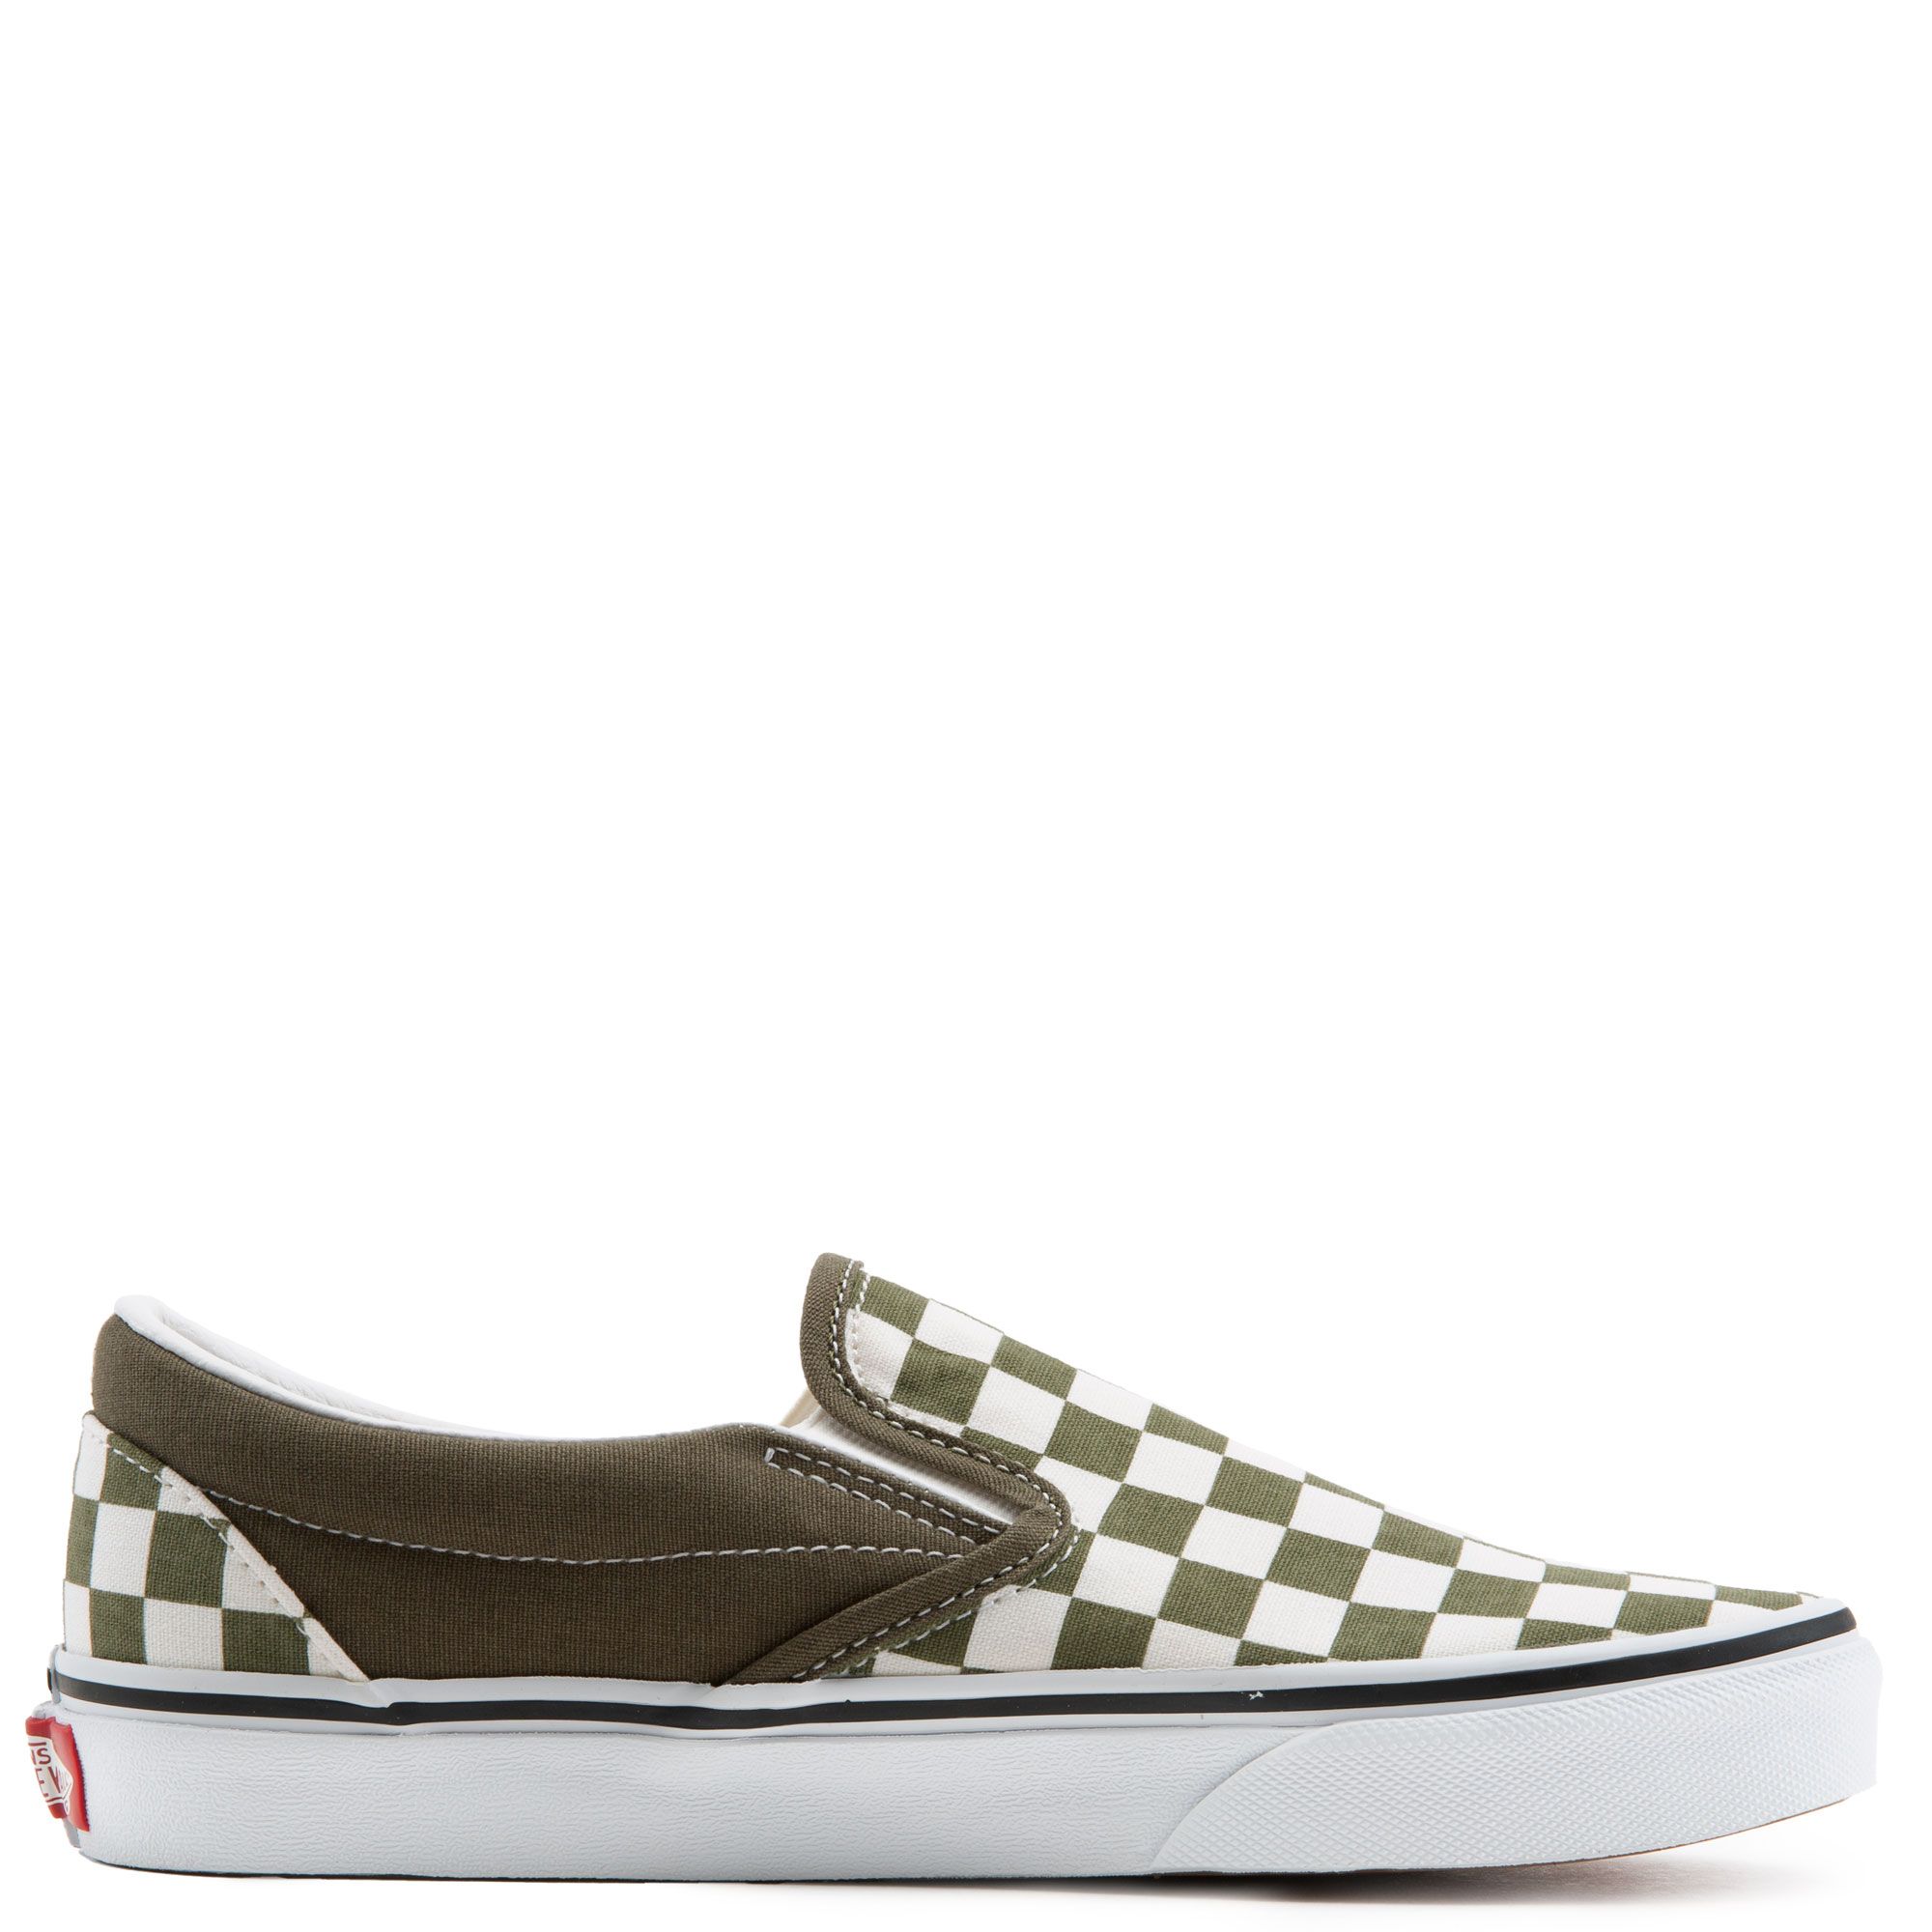 Vans Unisex Checkerboard Classic Slip-On Sneakers Yellow/White VN0A5JMH8LF US 4½